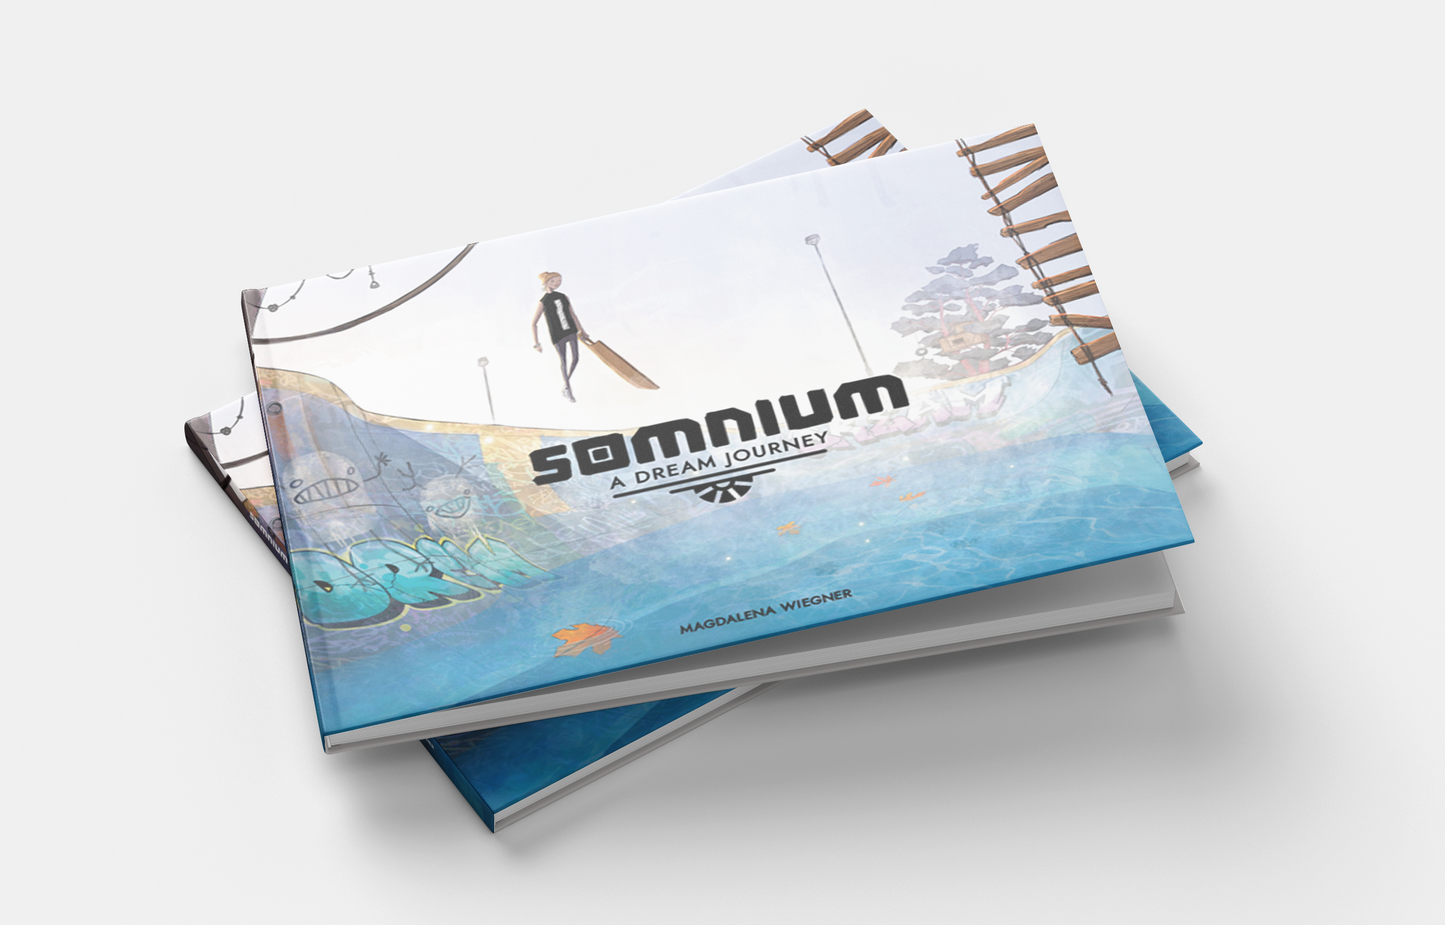 SOMNIUM: A Dream Journey by Magdalena Wiegner